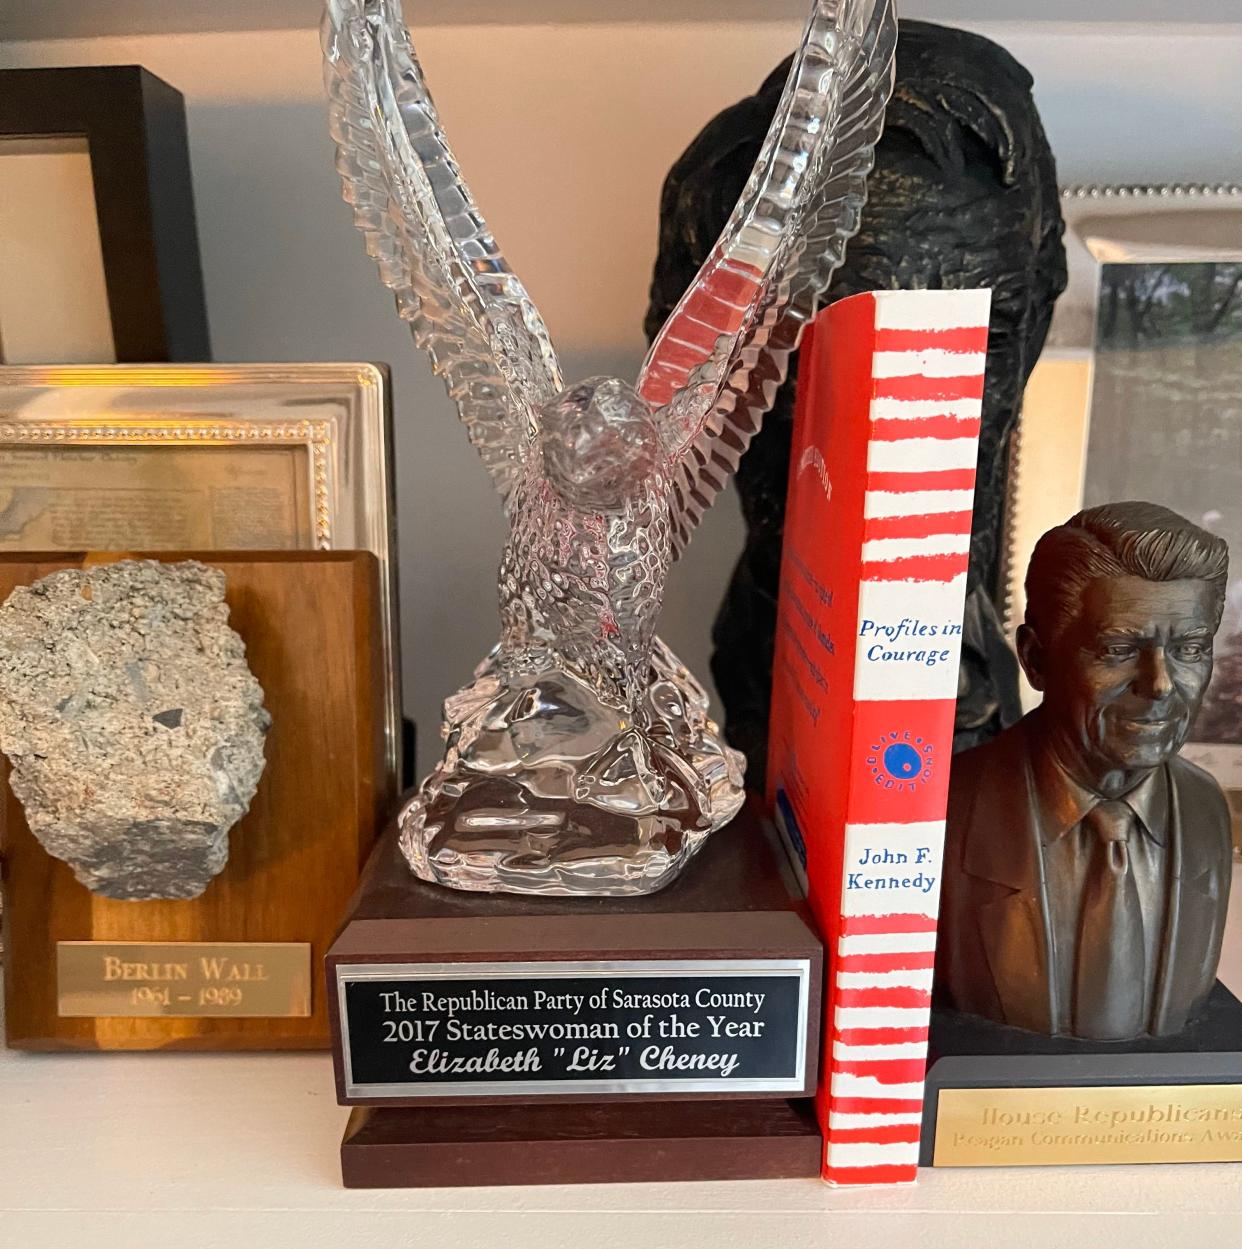 An award from the Sarasota County GOP honoring former Congresswoman Liz Cheney has been on a shelf in her office, despite the local organization denying it ever presented it to her.